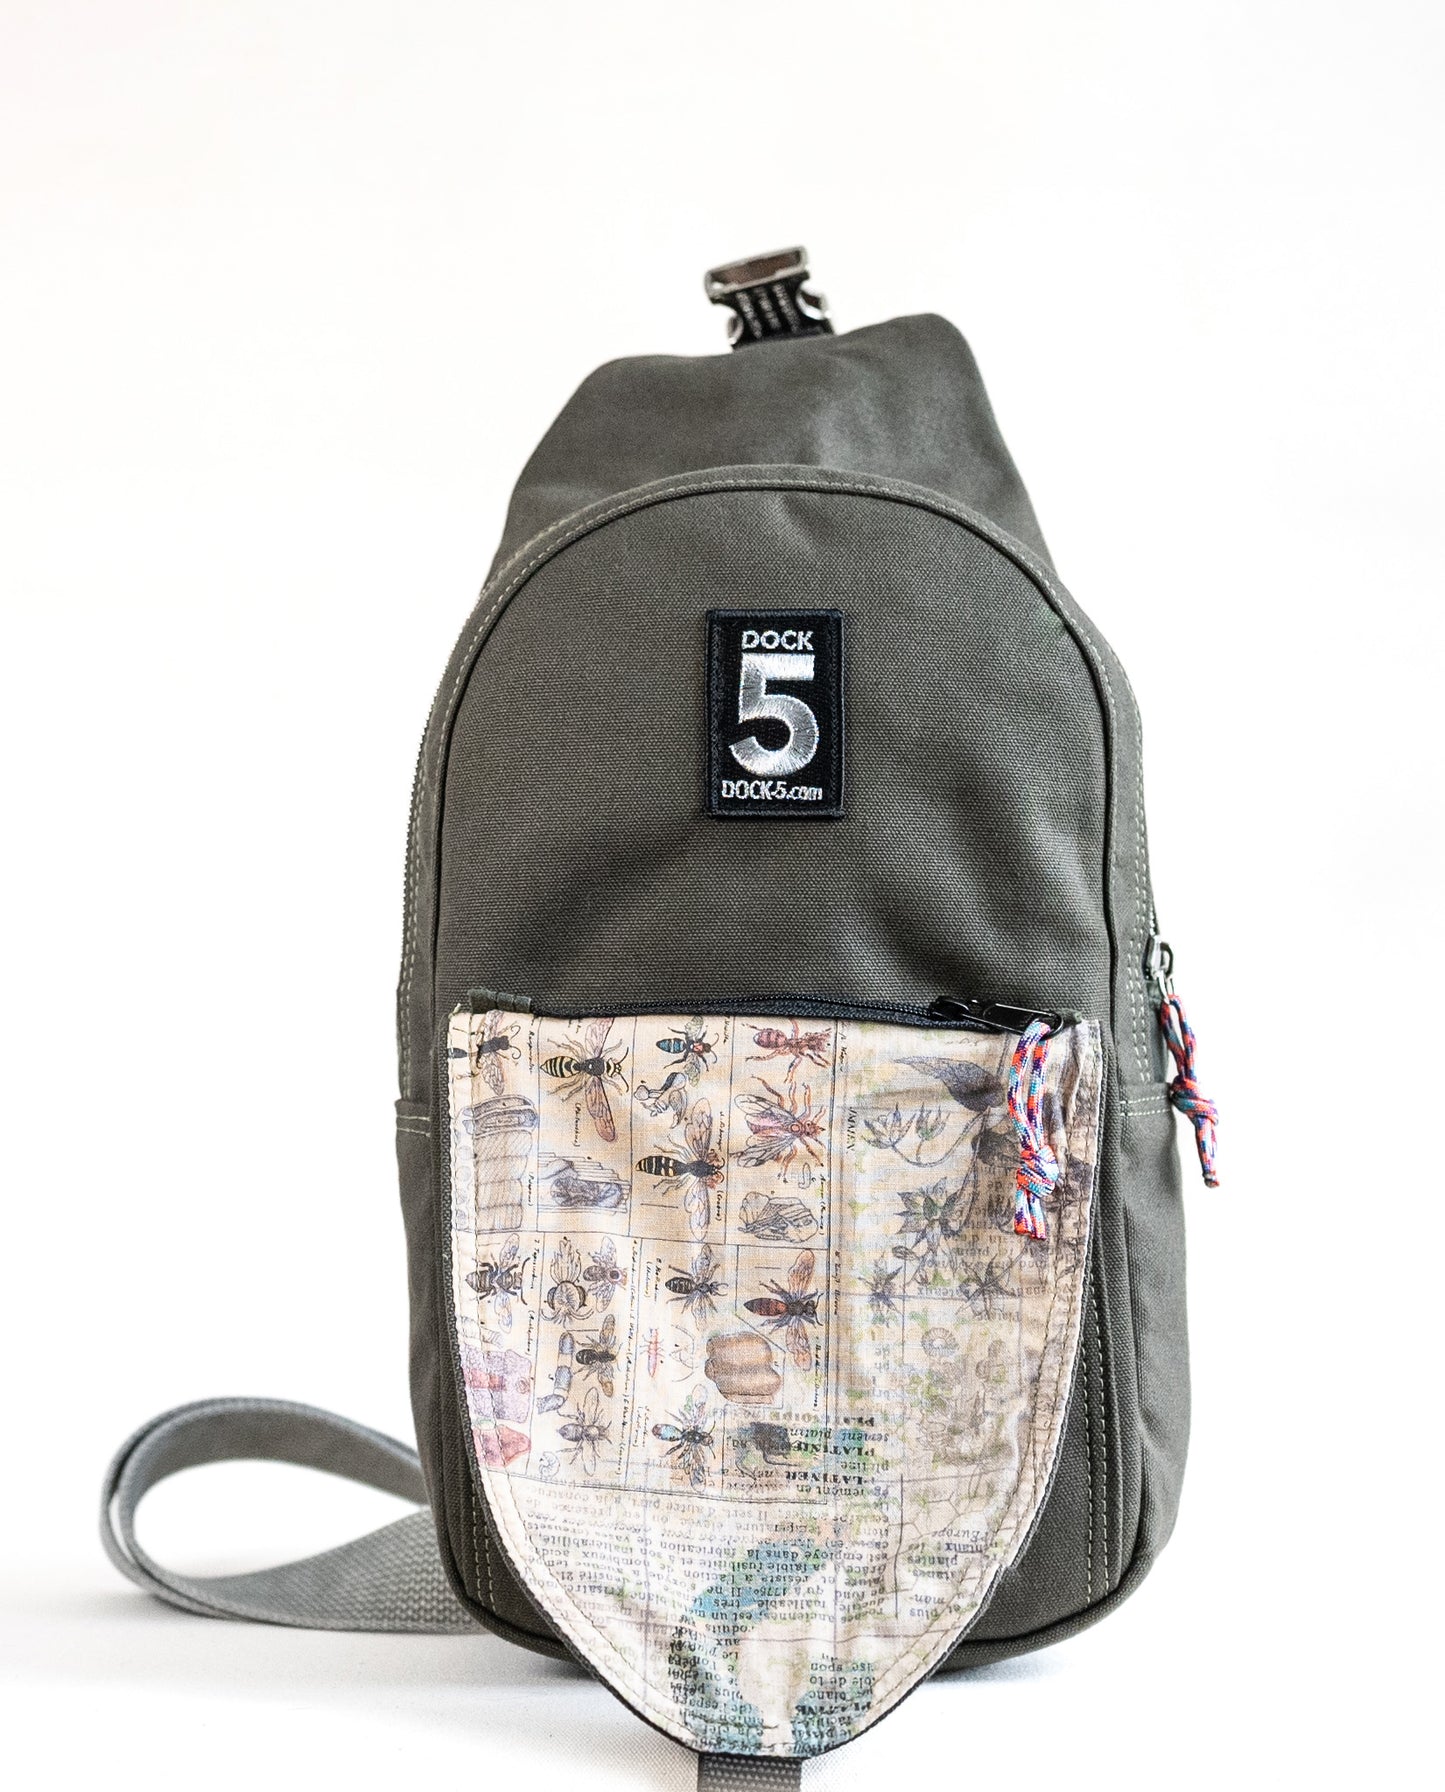 Dock 5’s hand-sewn Lupine Canvas Sling Bag is lined with a entomology print fabric